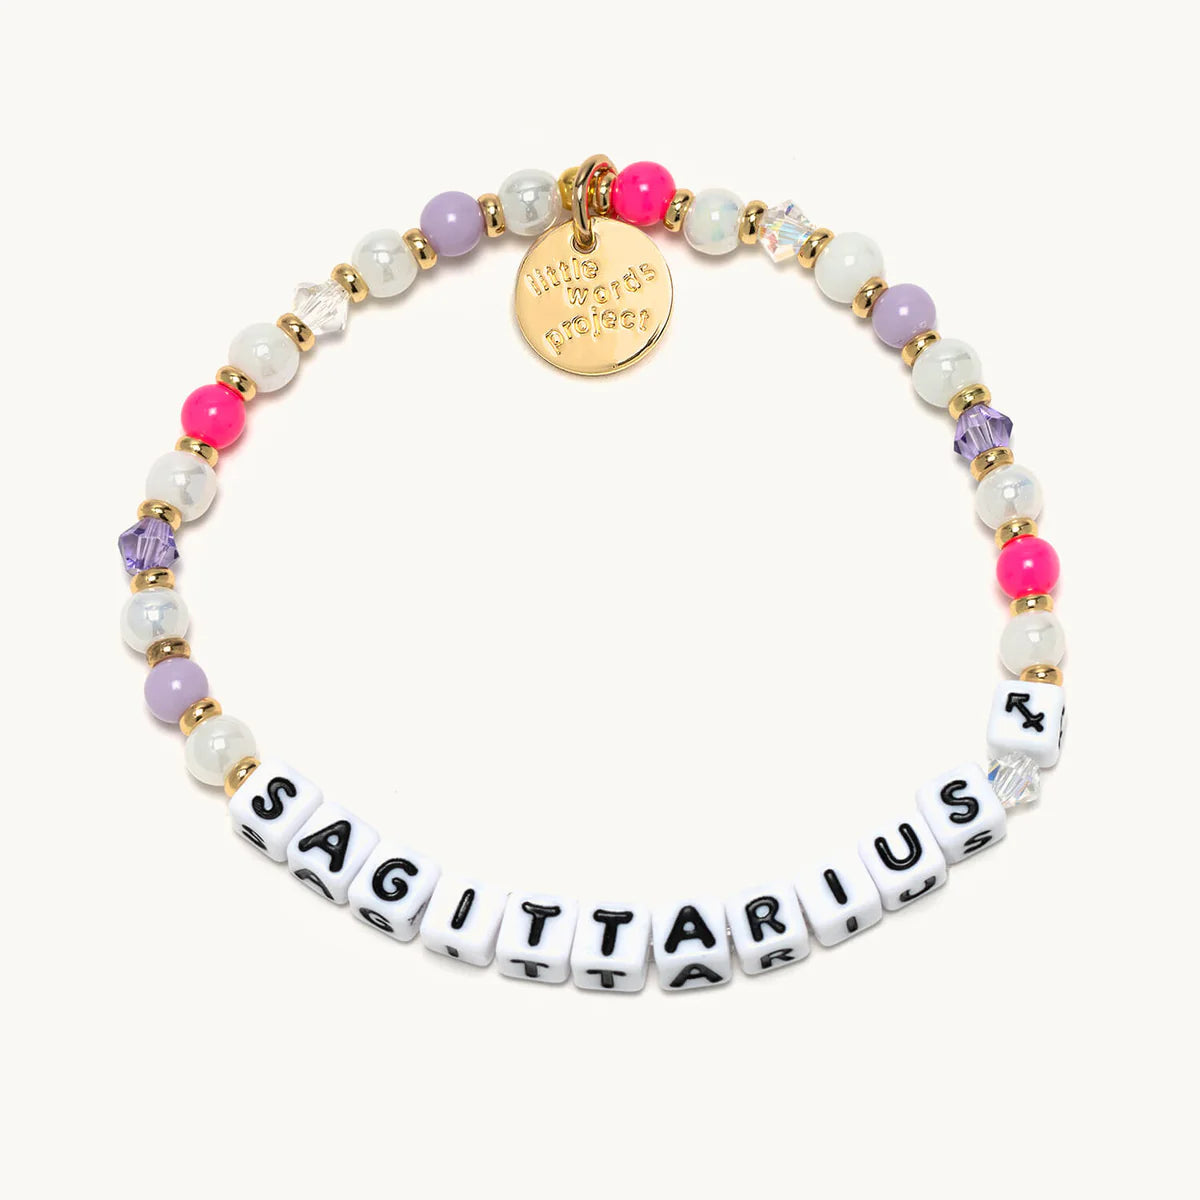 A beaded bracelet with the word Sagittarius, from Little Words Project®.